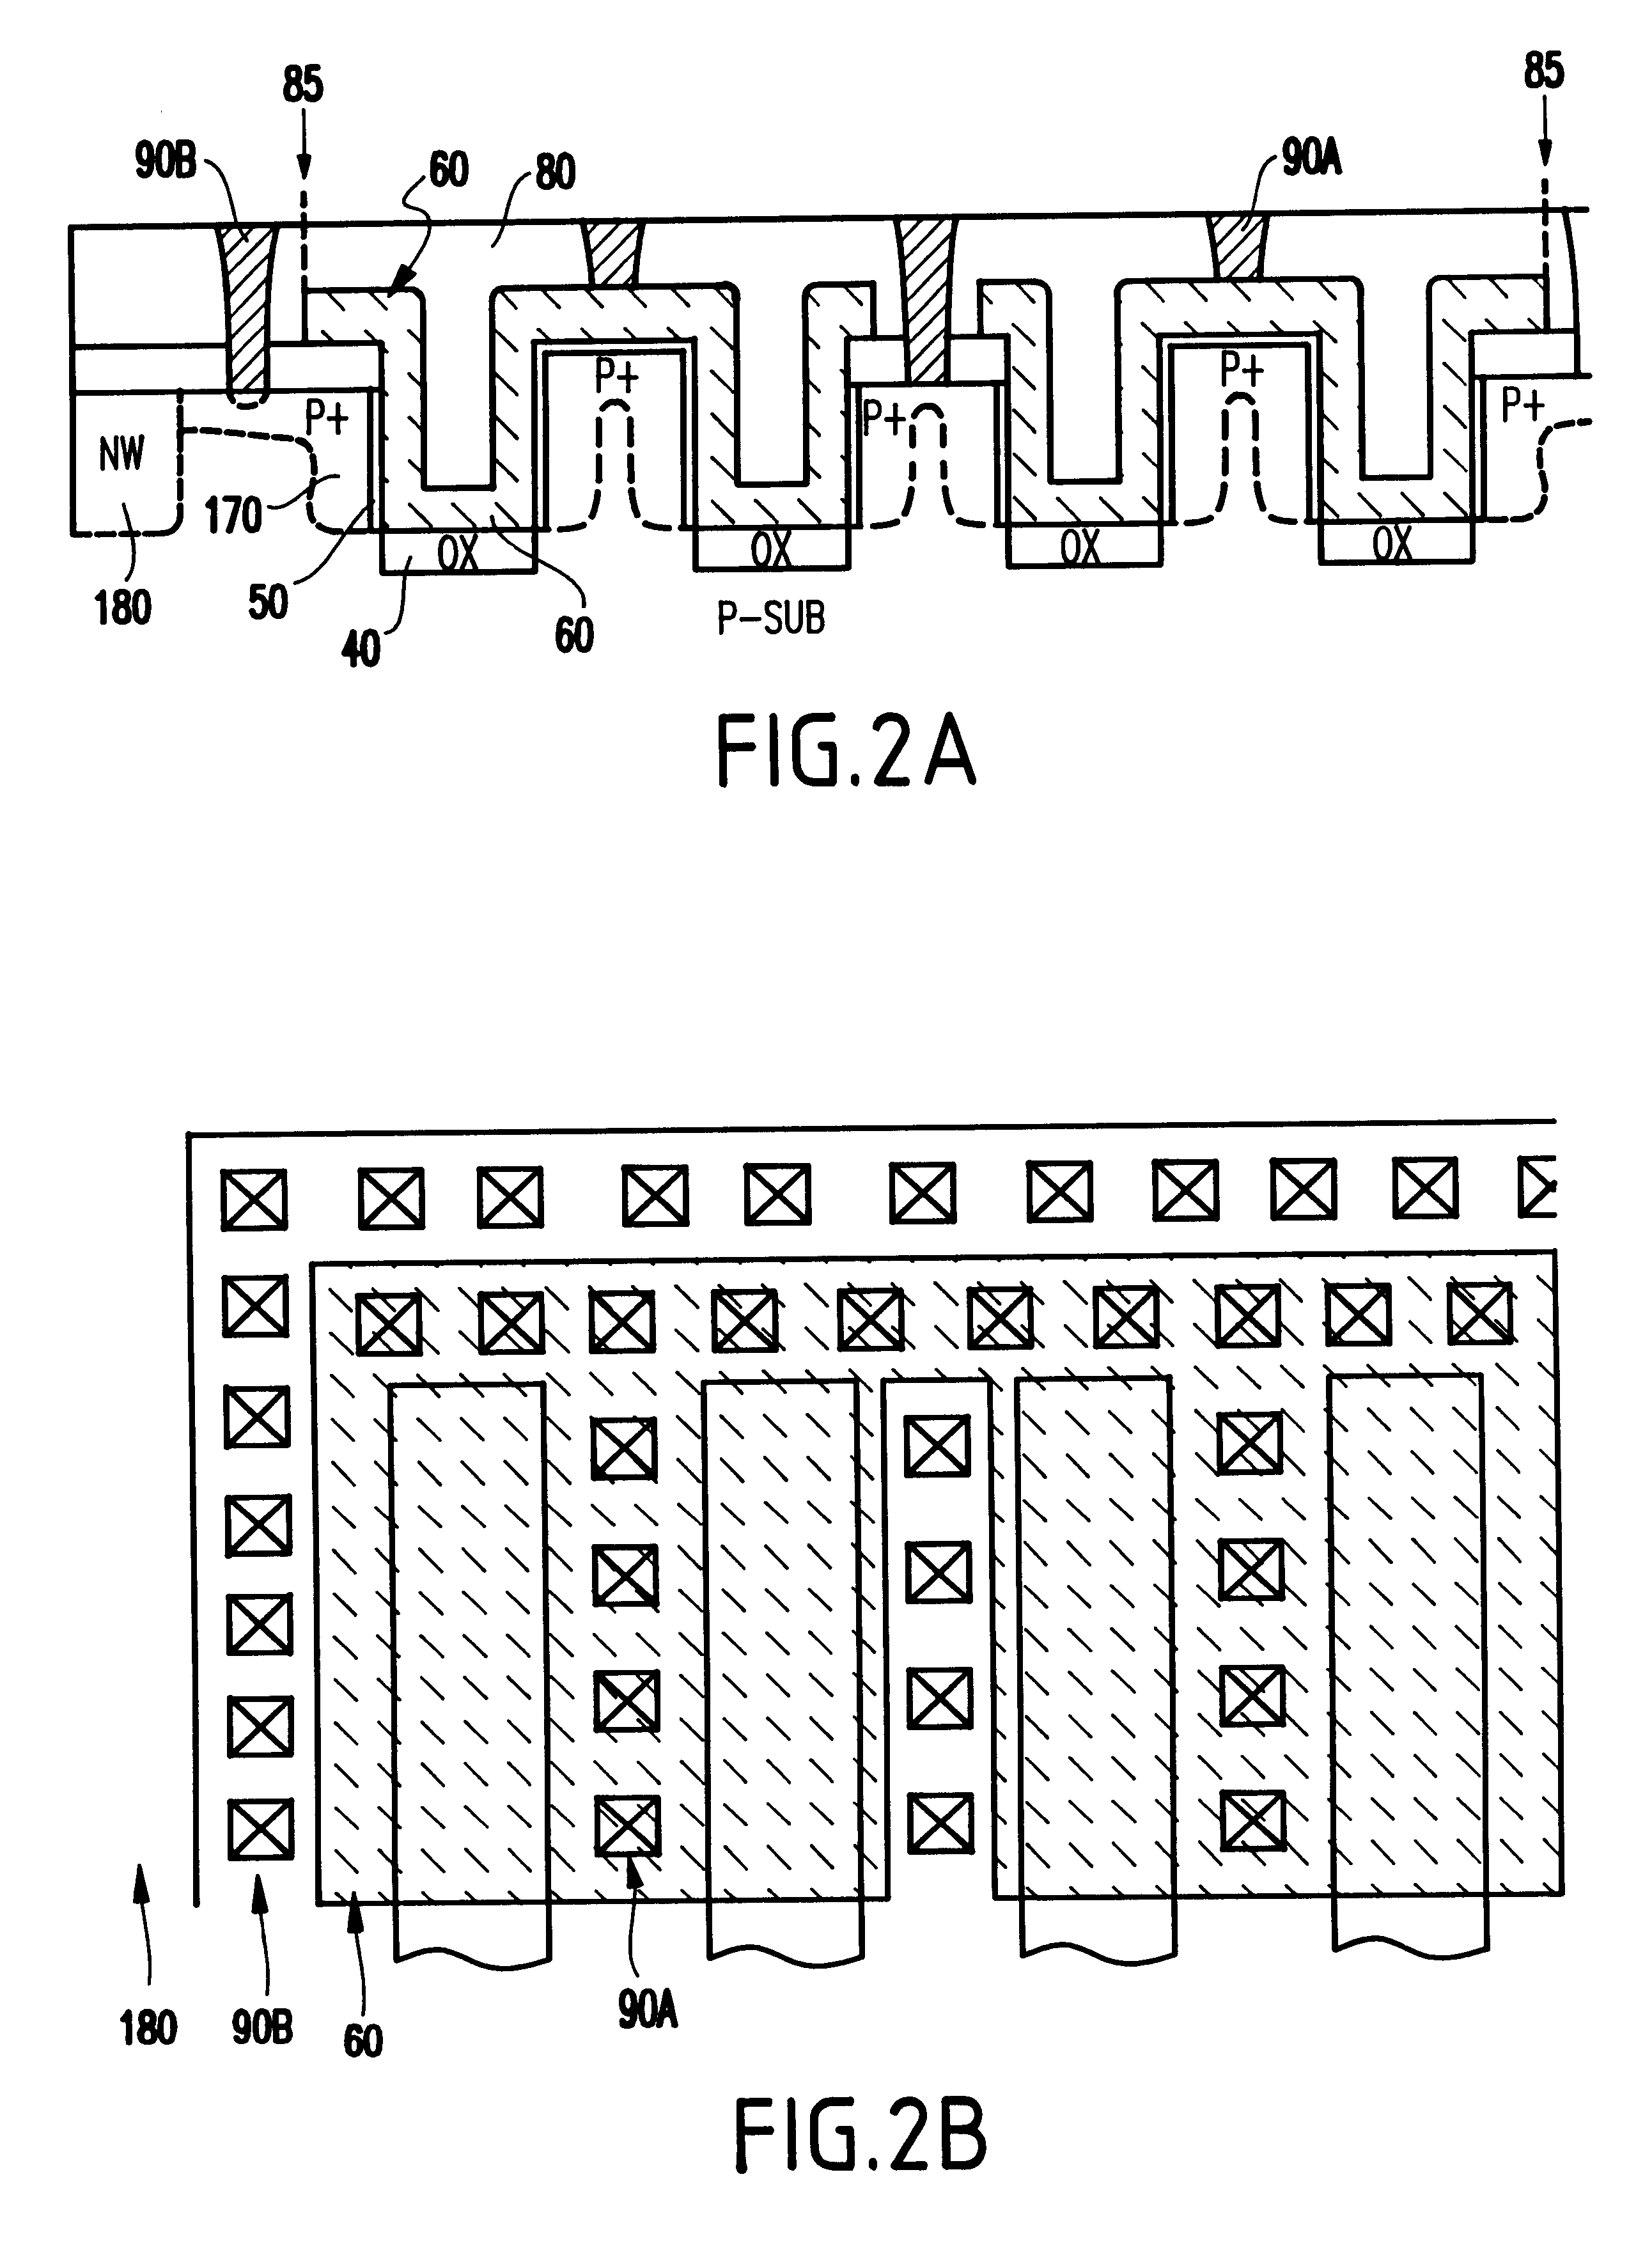 Method for increasing a very-large-scale-integrated (VLSI) capacitor size on bulk silicon and silicon-on-insulator (SOI) wafers and structure formed thereby